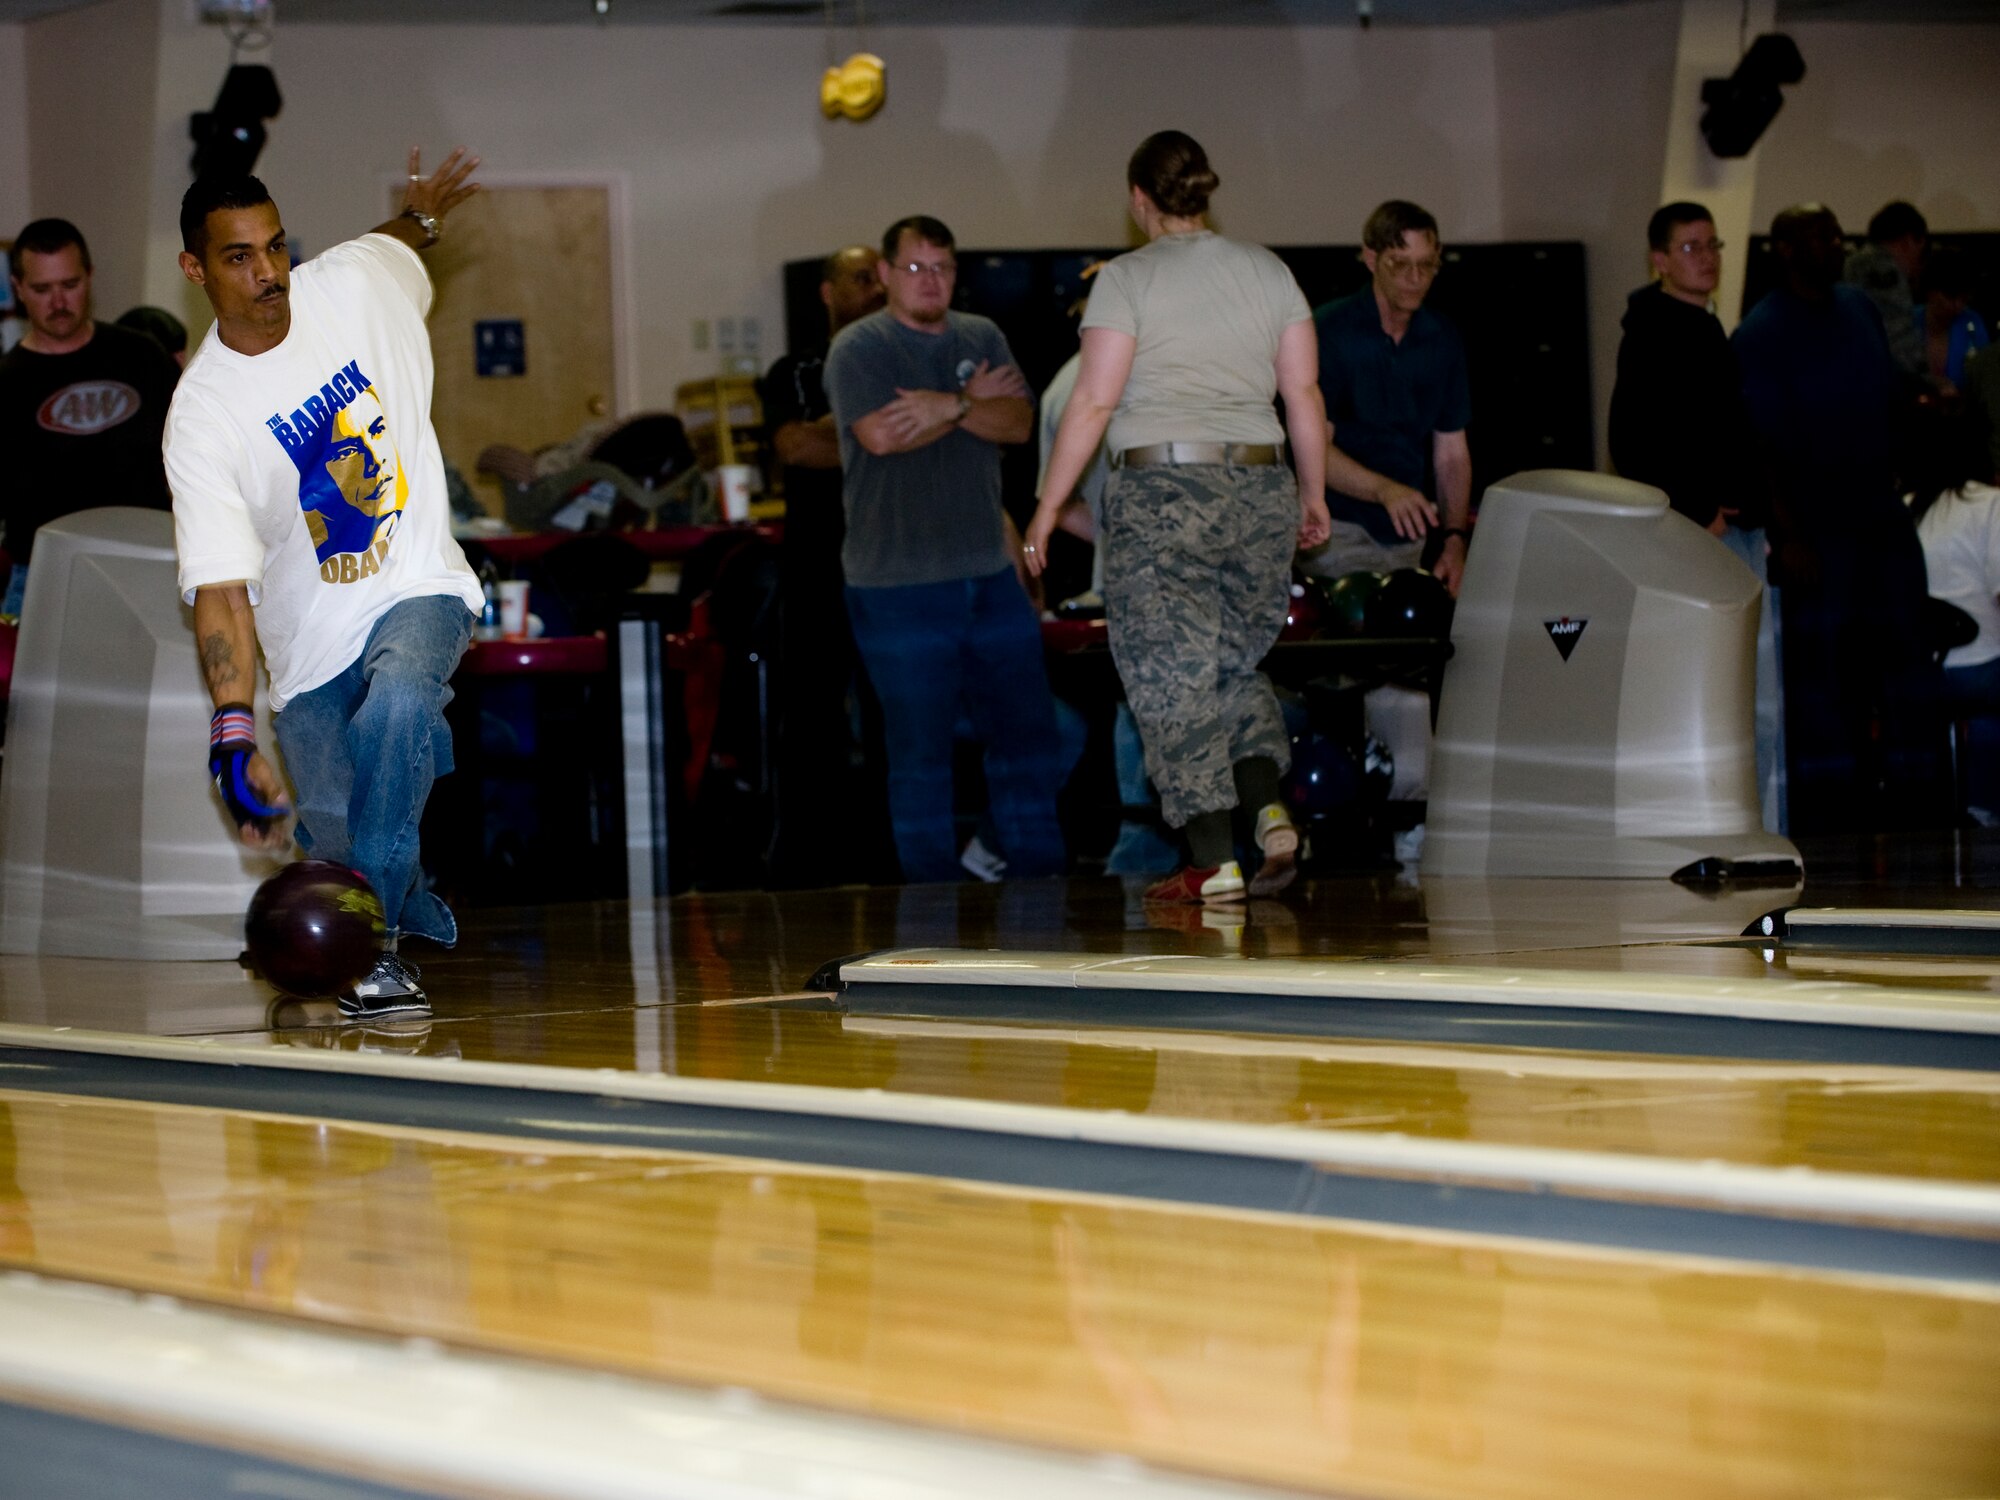 ELMENDORF AIR FORCE BASE, Alaska -- Master Sgt. Edward Washington, 3rd Mission Support Squadron, attempts to make strike during the opening day of the Intramural Bowling League. (U.S. Air Force photo/Staff Sgt. Joshua Garcia)